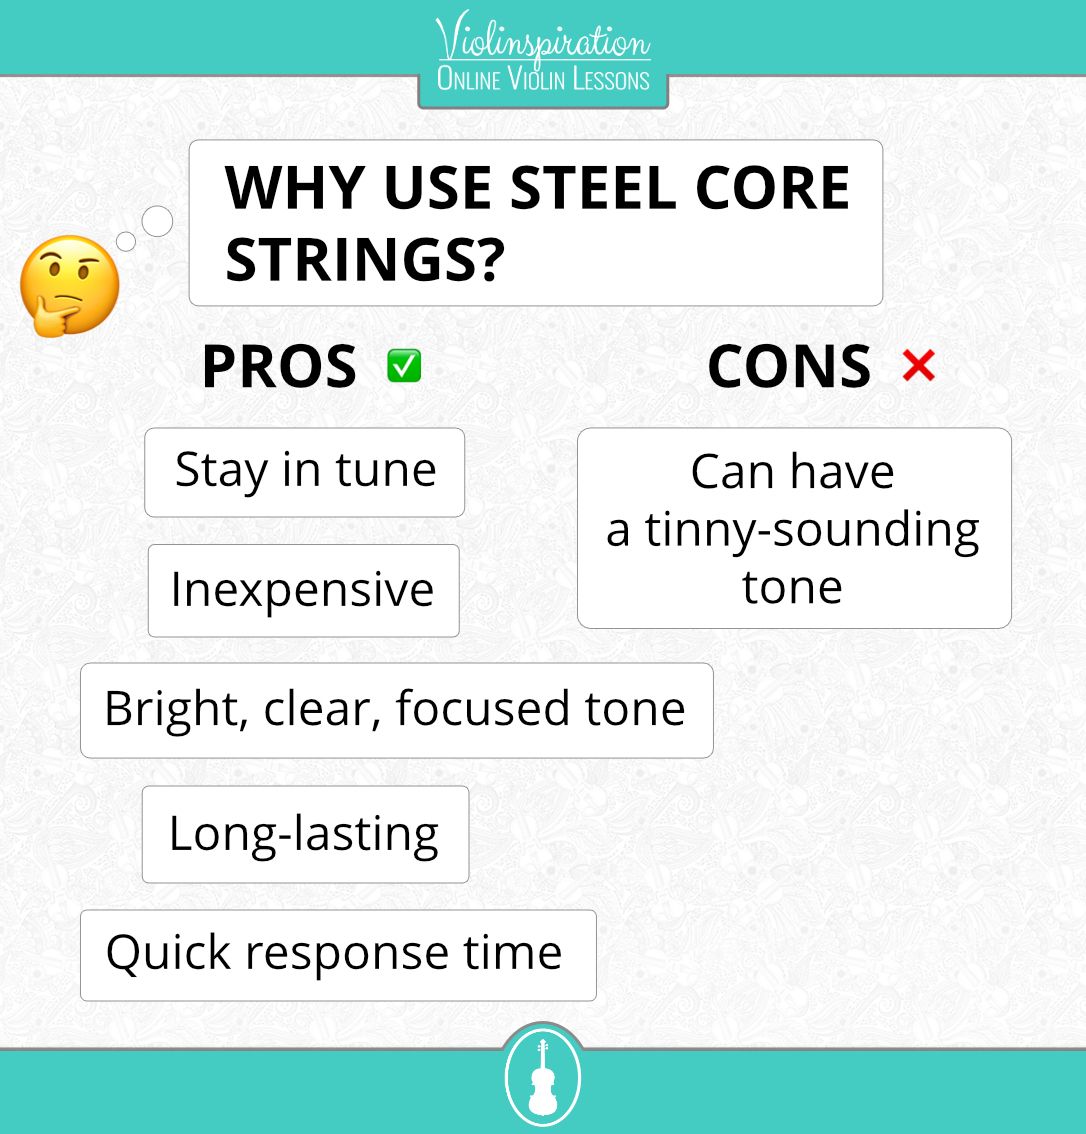 Violin strings - pros and cons of steel core strings